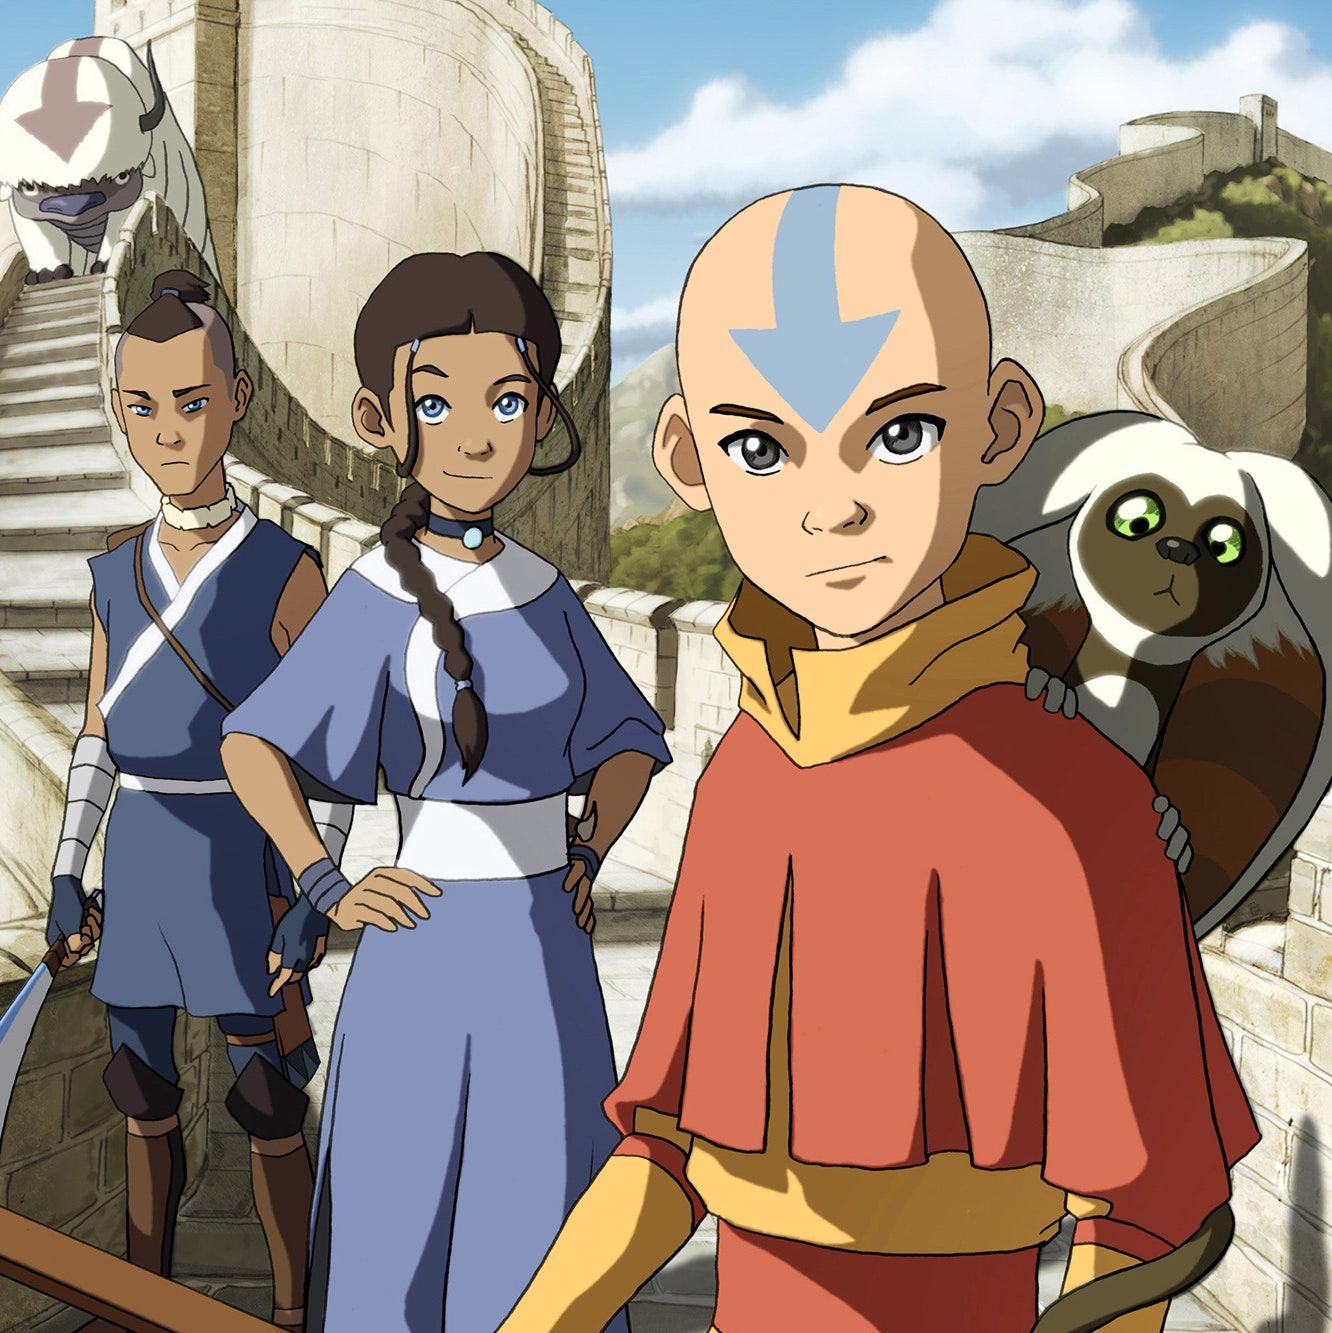 Rumor Avatar The Last Airbender Quest For Balance para PS4 e PS5